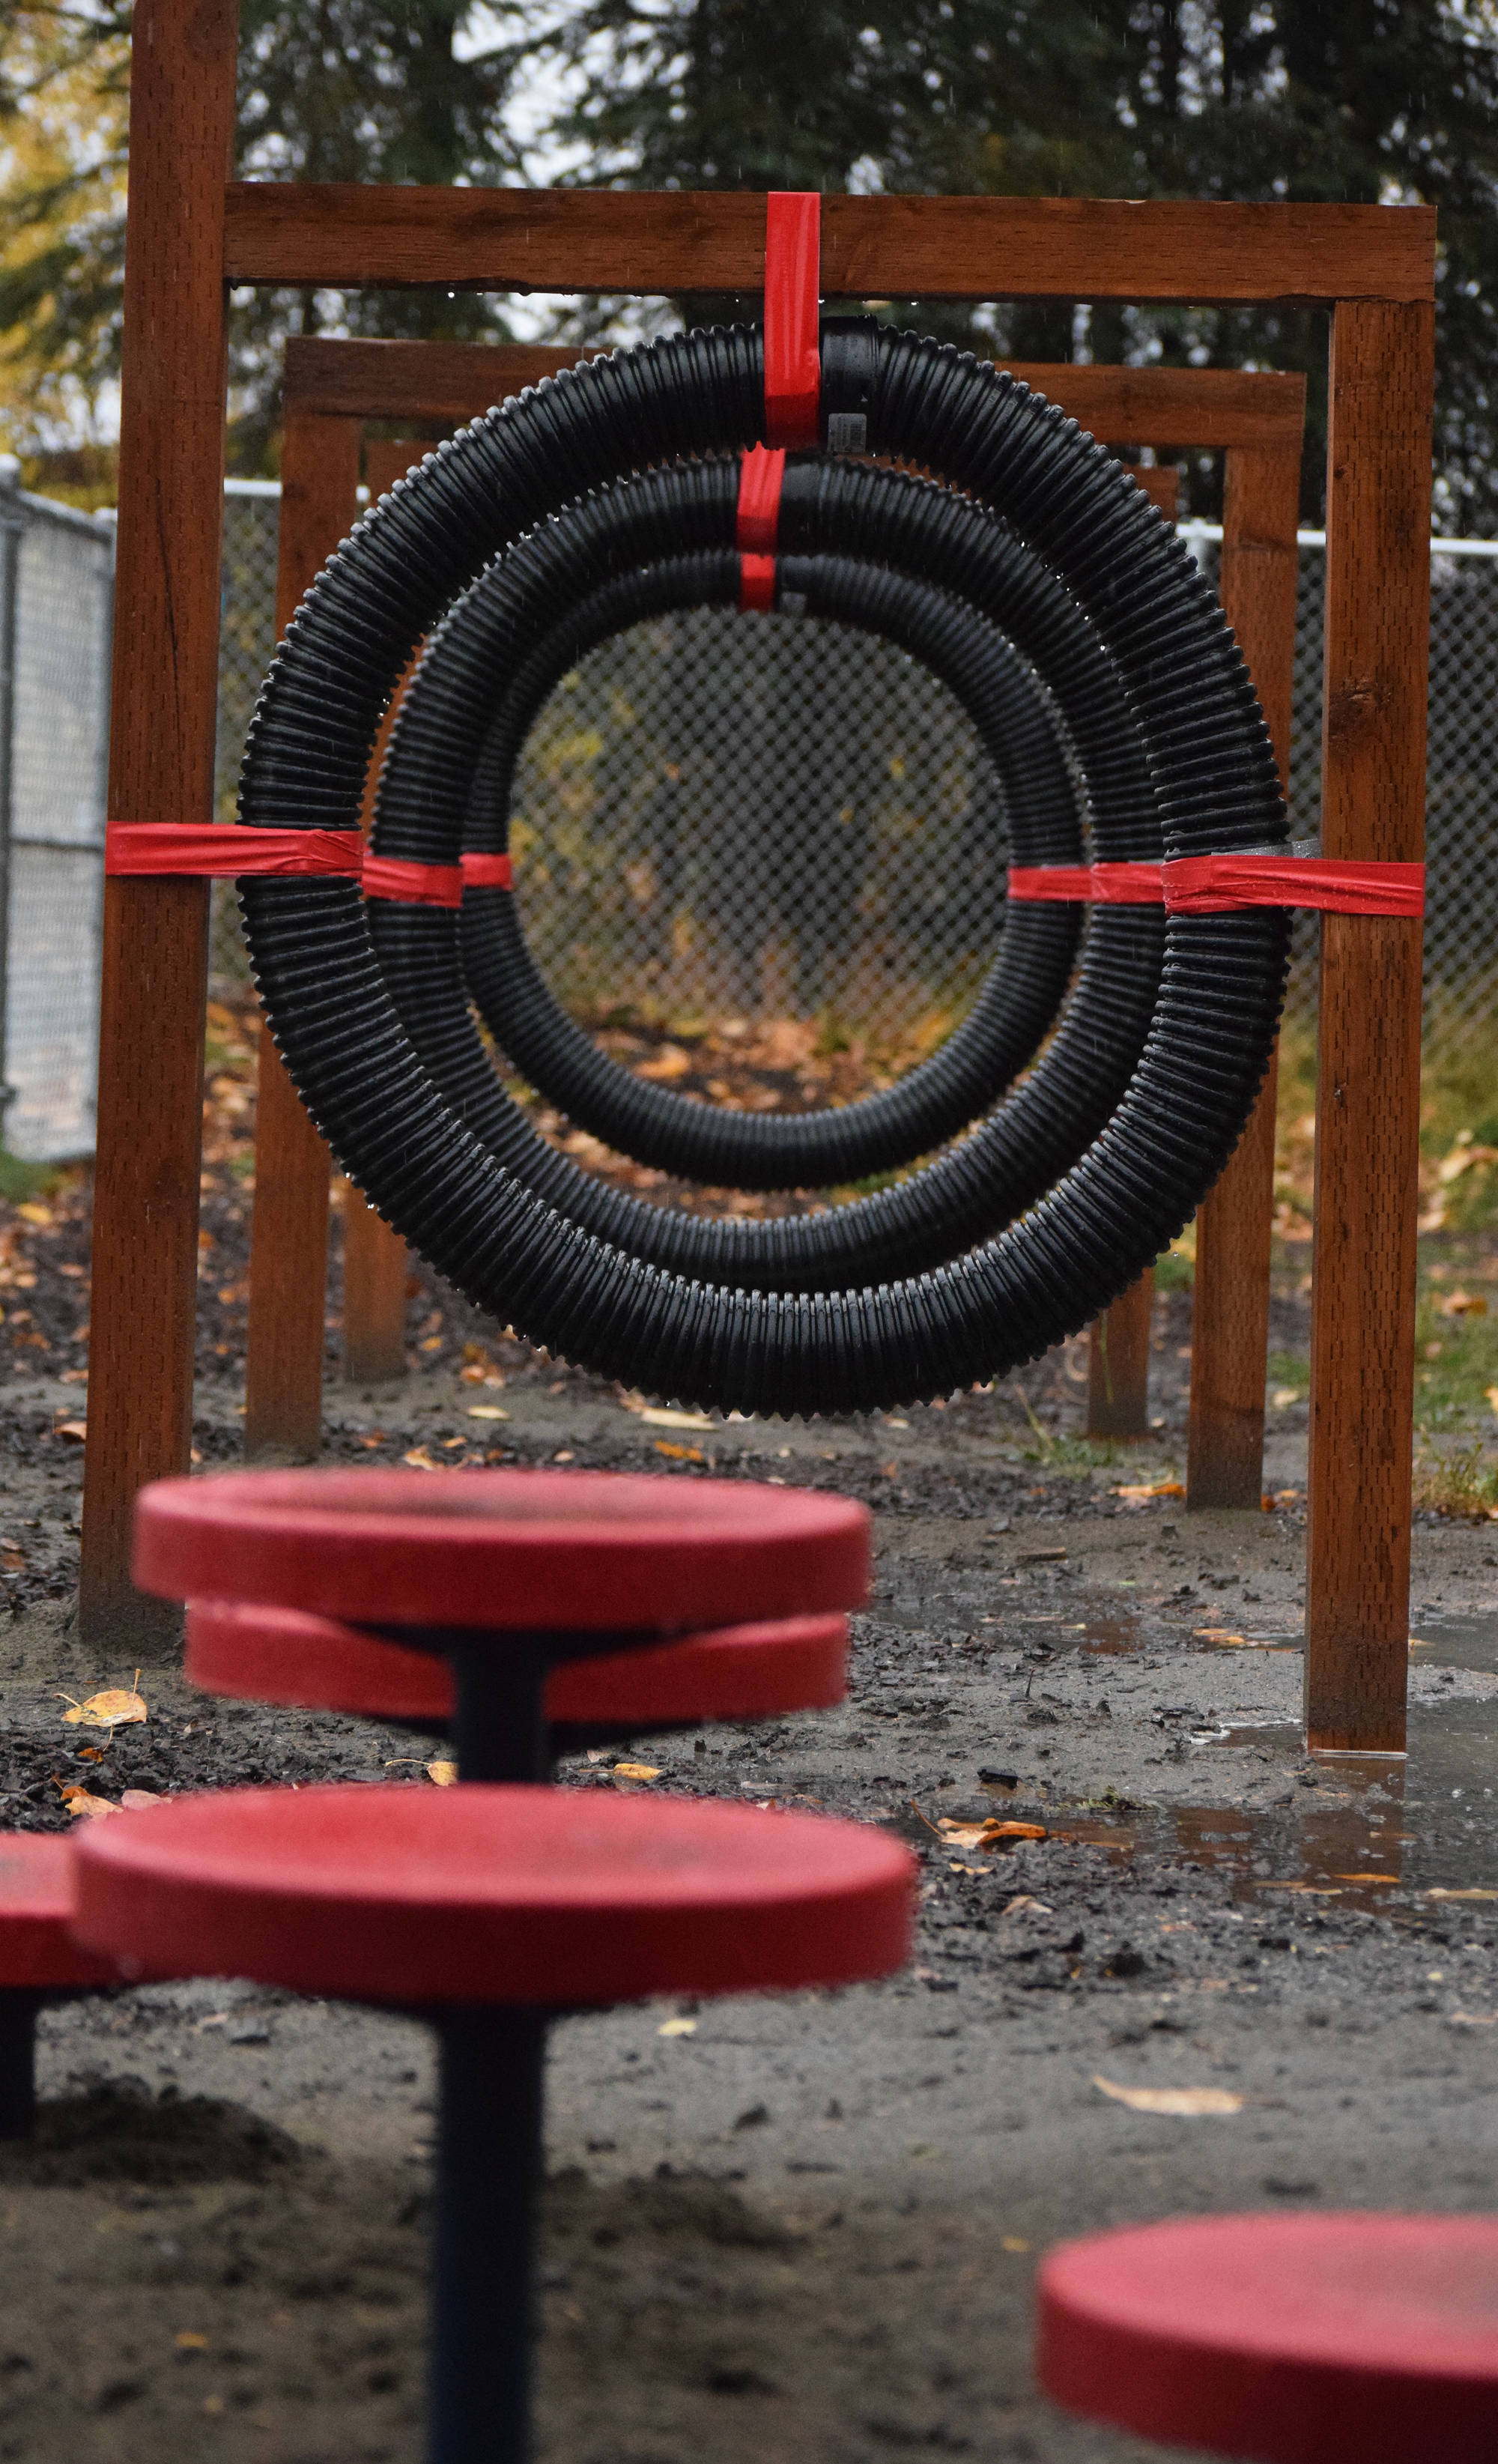 New additions to the 3 Friends Dog Park include a row of rings and uneven steps, seen here Friday afternoon in Soldotna. (Photo by Joey Klecka/Peninsula Clarion)